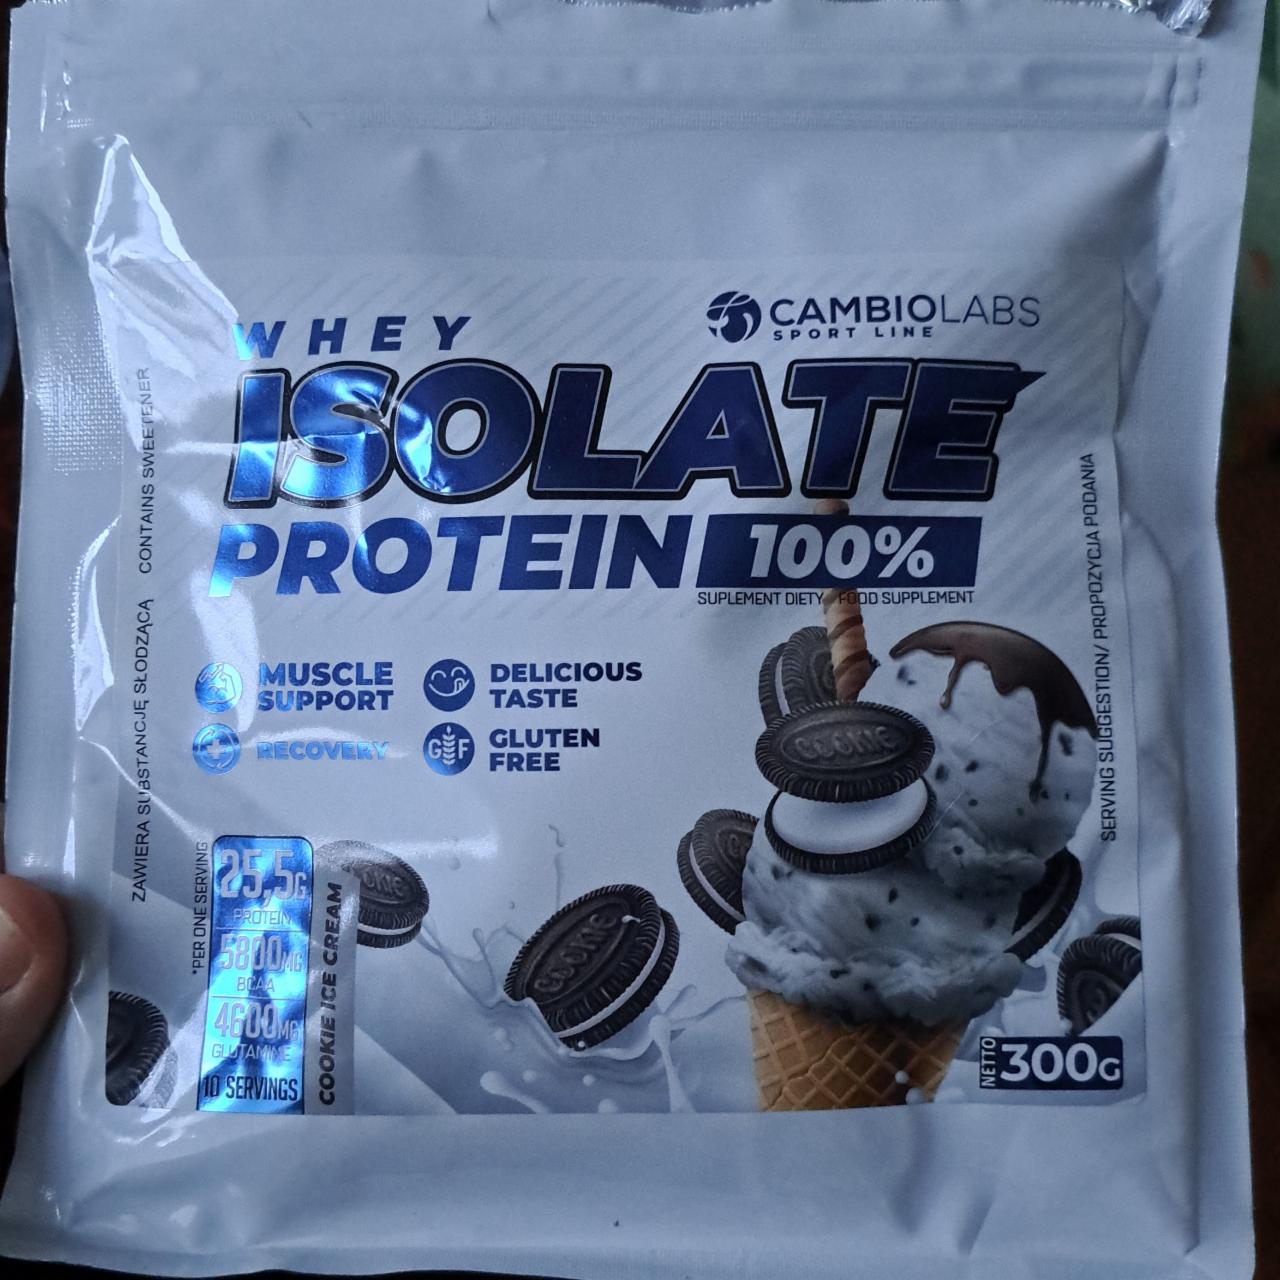 Zdjęcia - Whey Isolate Protein 100% Cookie Ice Cream CambioLabs